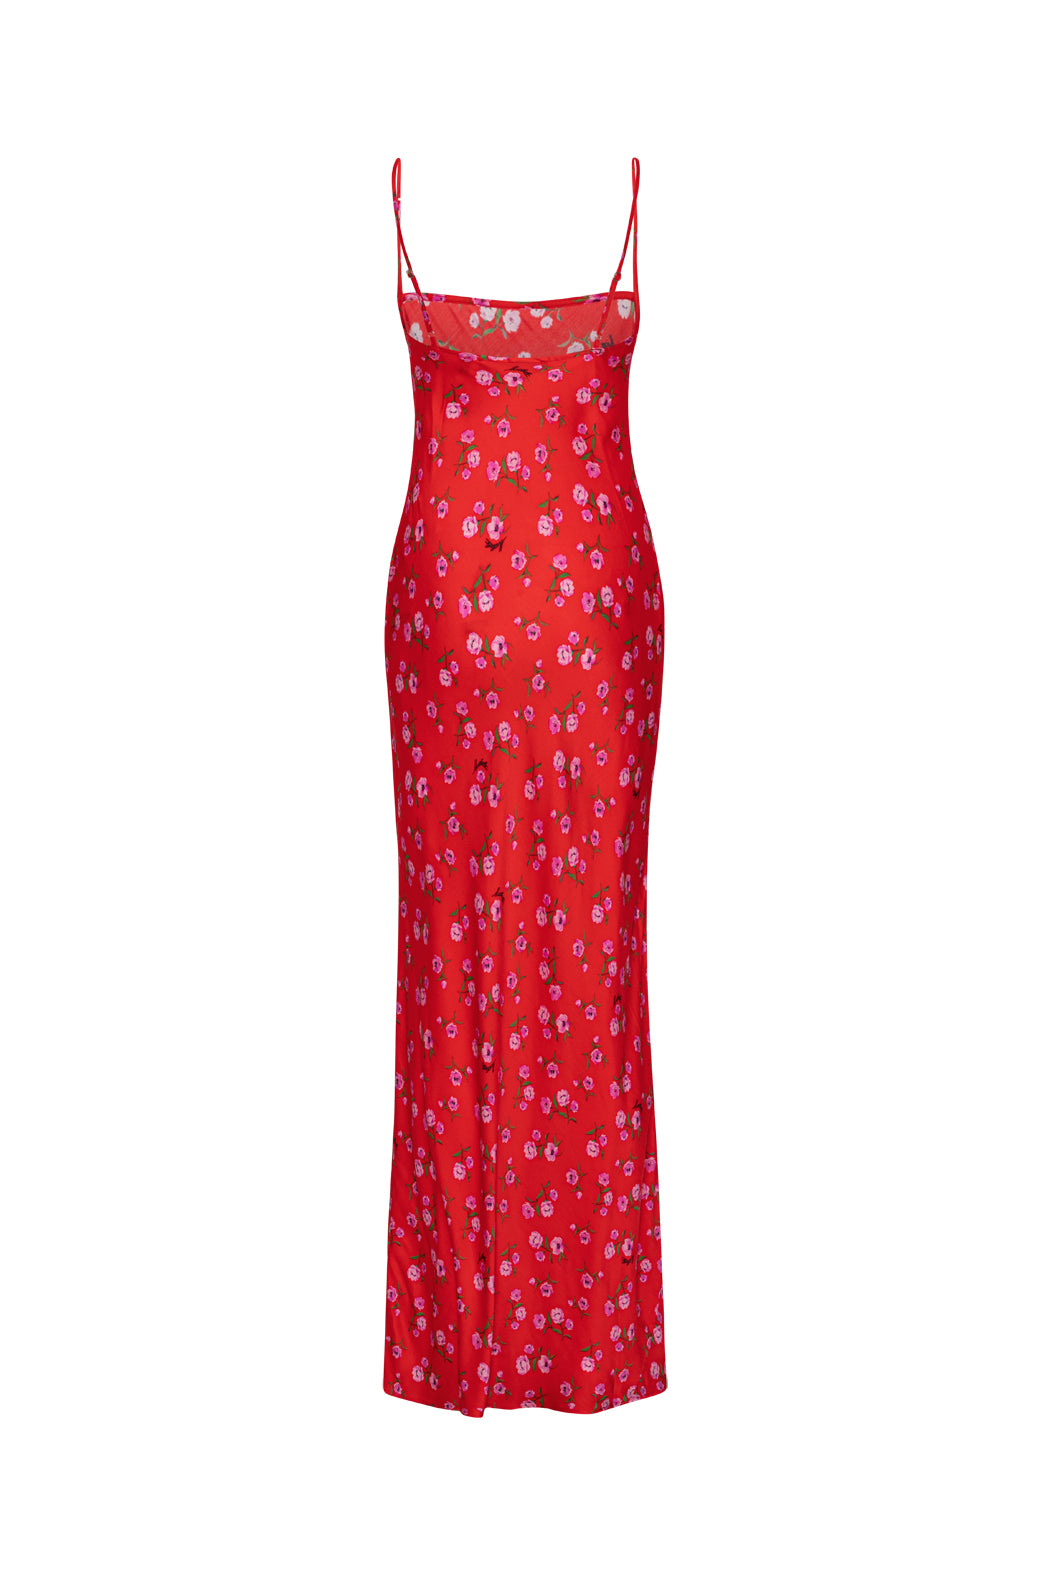 Printed Maxi Dress - Wildeve Cluster + High
Risk Red Comb